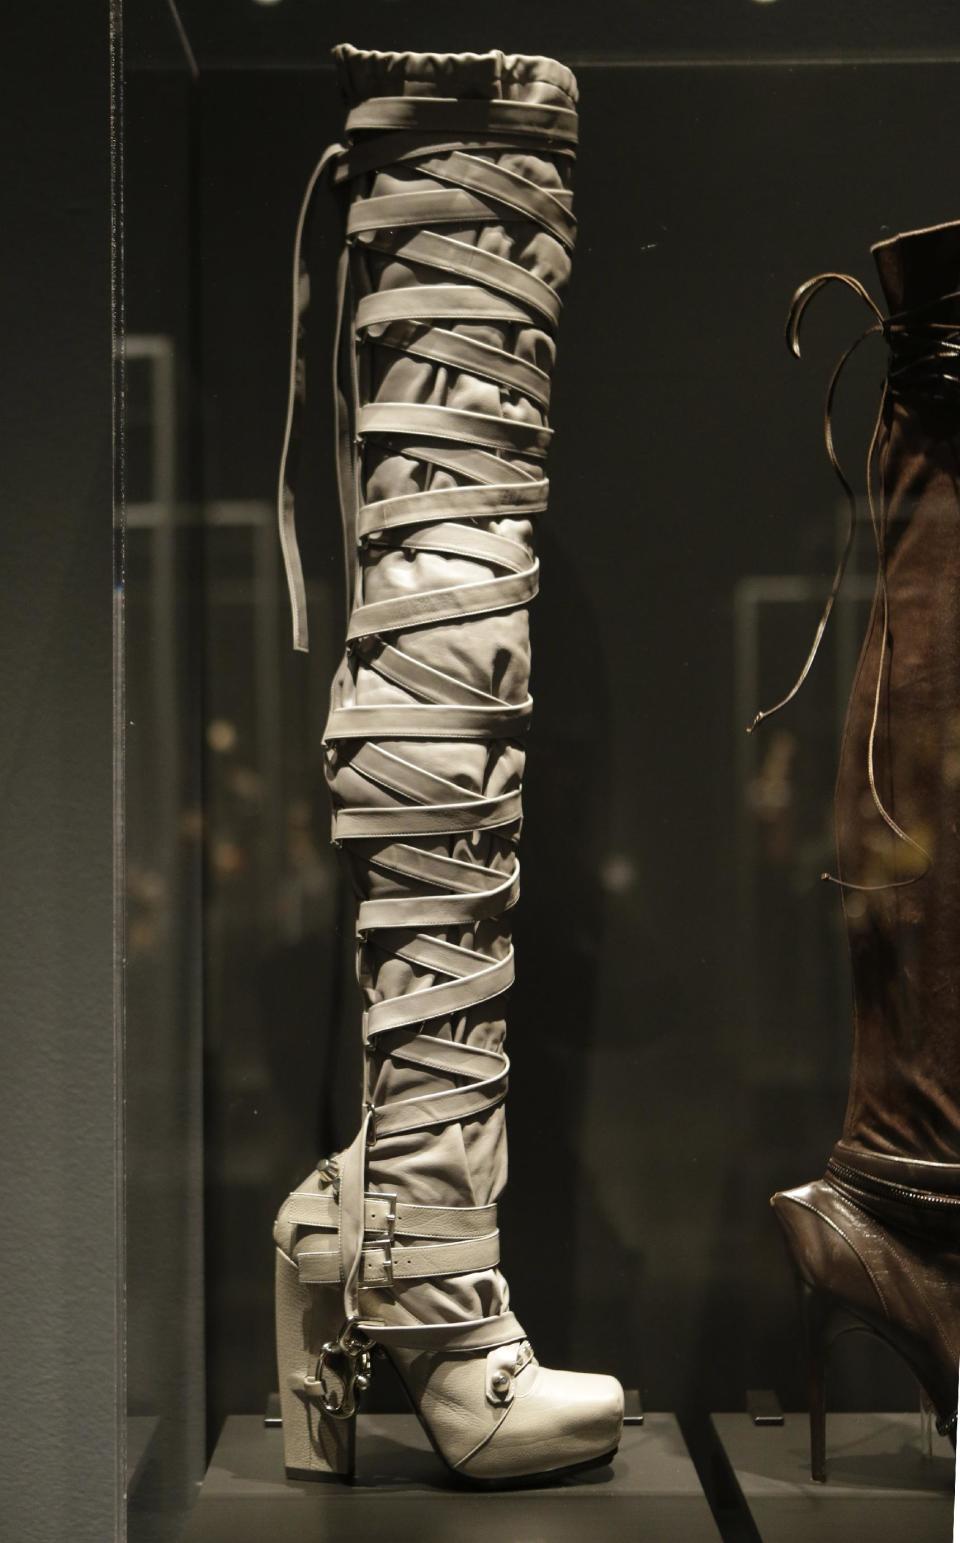 This Feb. 11, 2013 photo shows a thigh-high boot designed by Nicholas Kirkwood for the Rodarte spring 2009 fashion show at the "Shoe Obsession" exhibit at The Museum at the Fashion Institute of Technology Museum in New York. The exhibition, showing off 153 specimens, runs through April 13. (AP Photo/Kathy Willens)